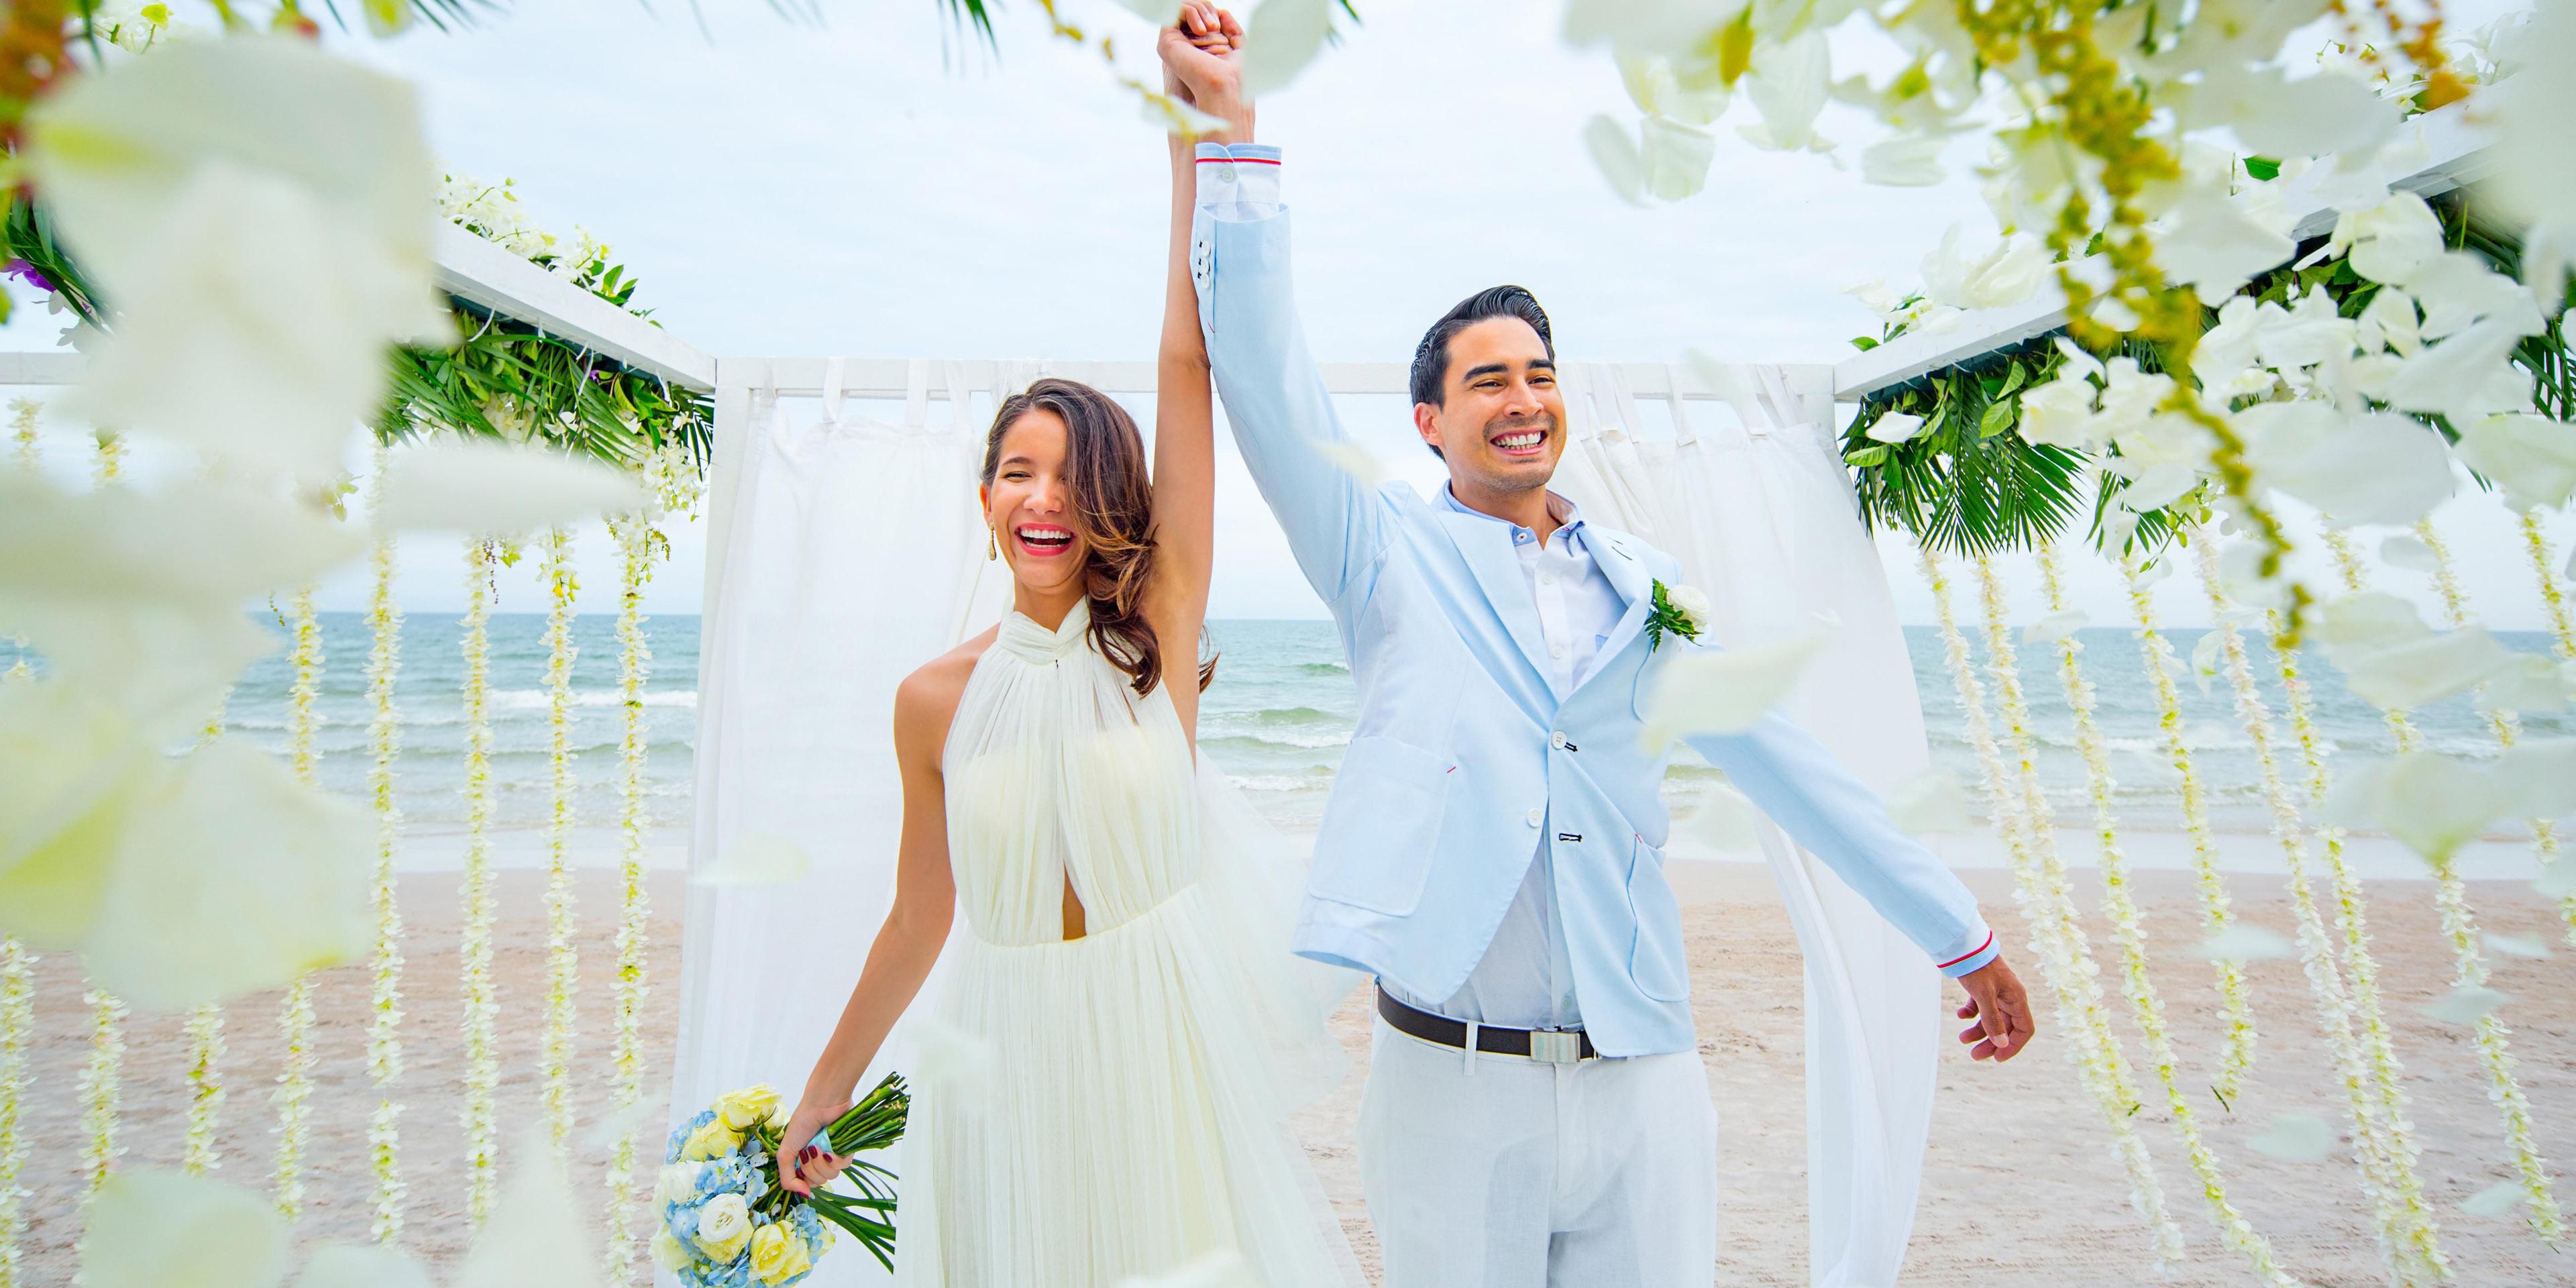 Unchanging love deserves a location unlike any other. InterContinental Hua Hin Resort is the perfect wedding destination for you.